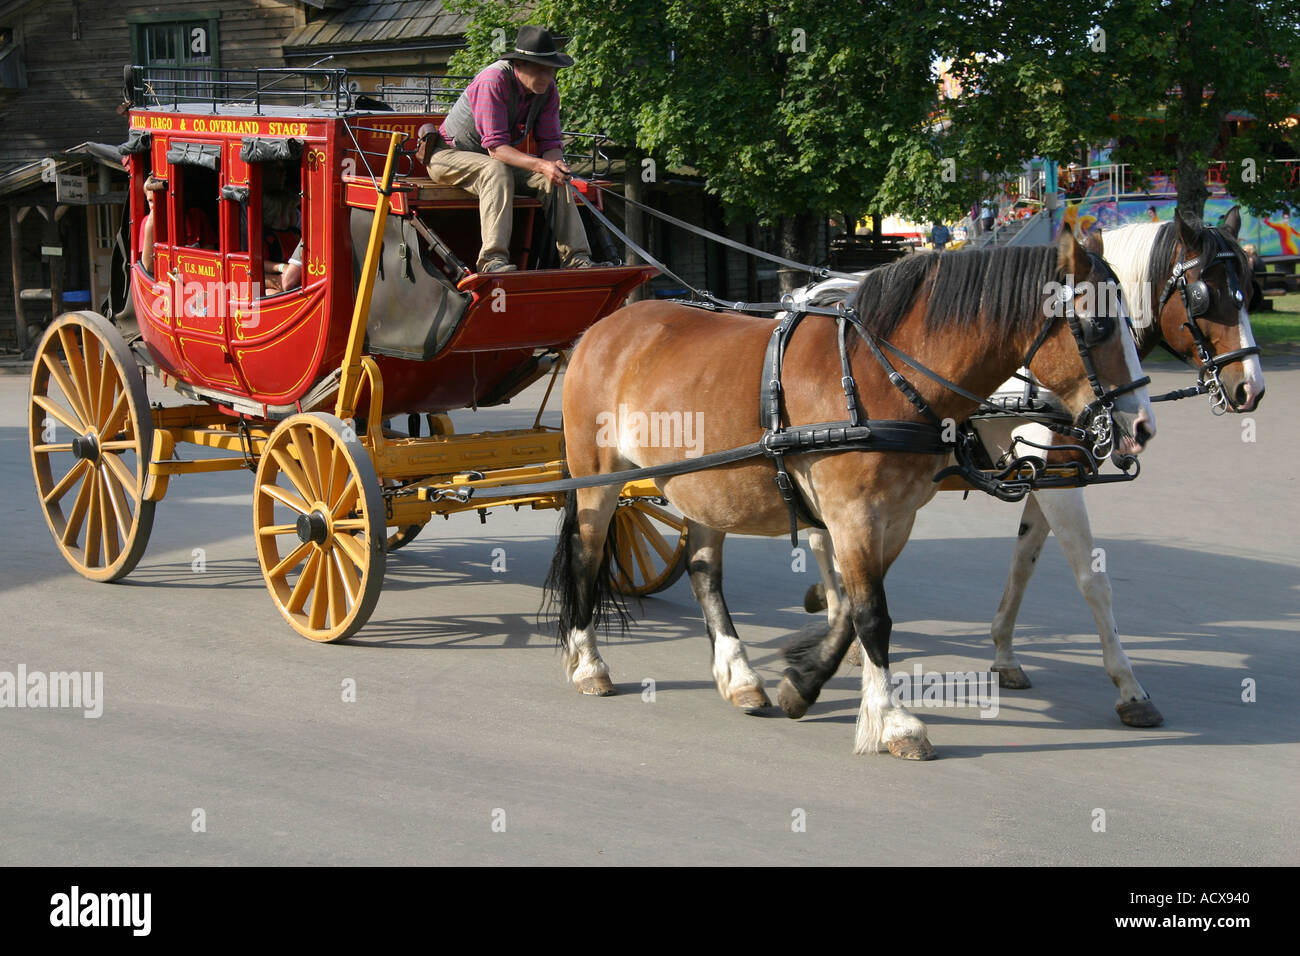 Wells Fargo stagecoach at a western theme park Stock Photo